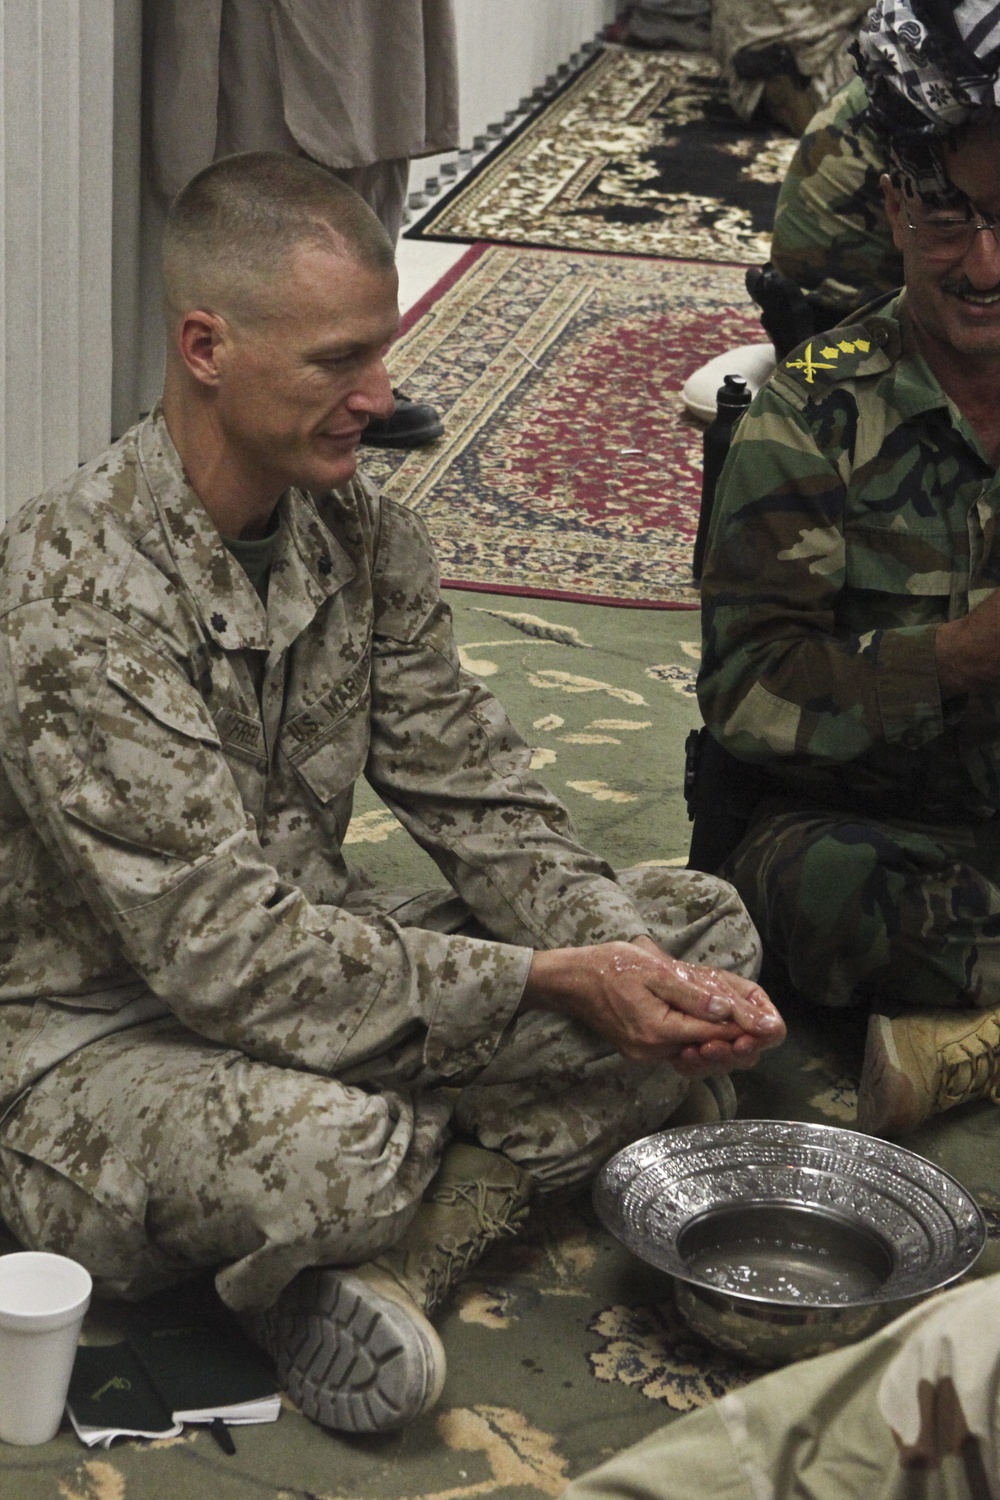 RCT-5 Marines participate in simulated key leader engagement